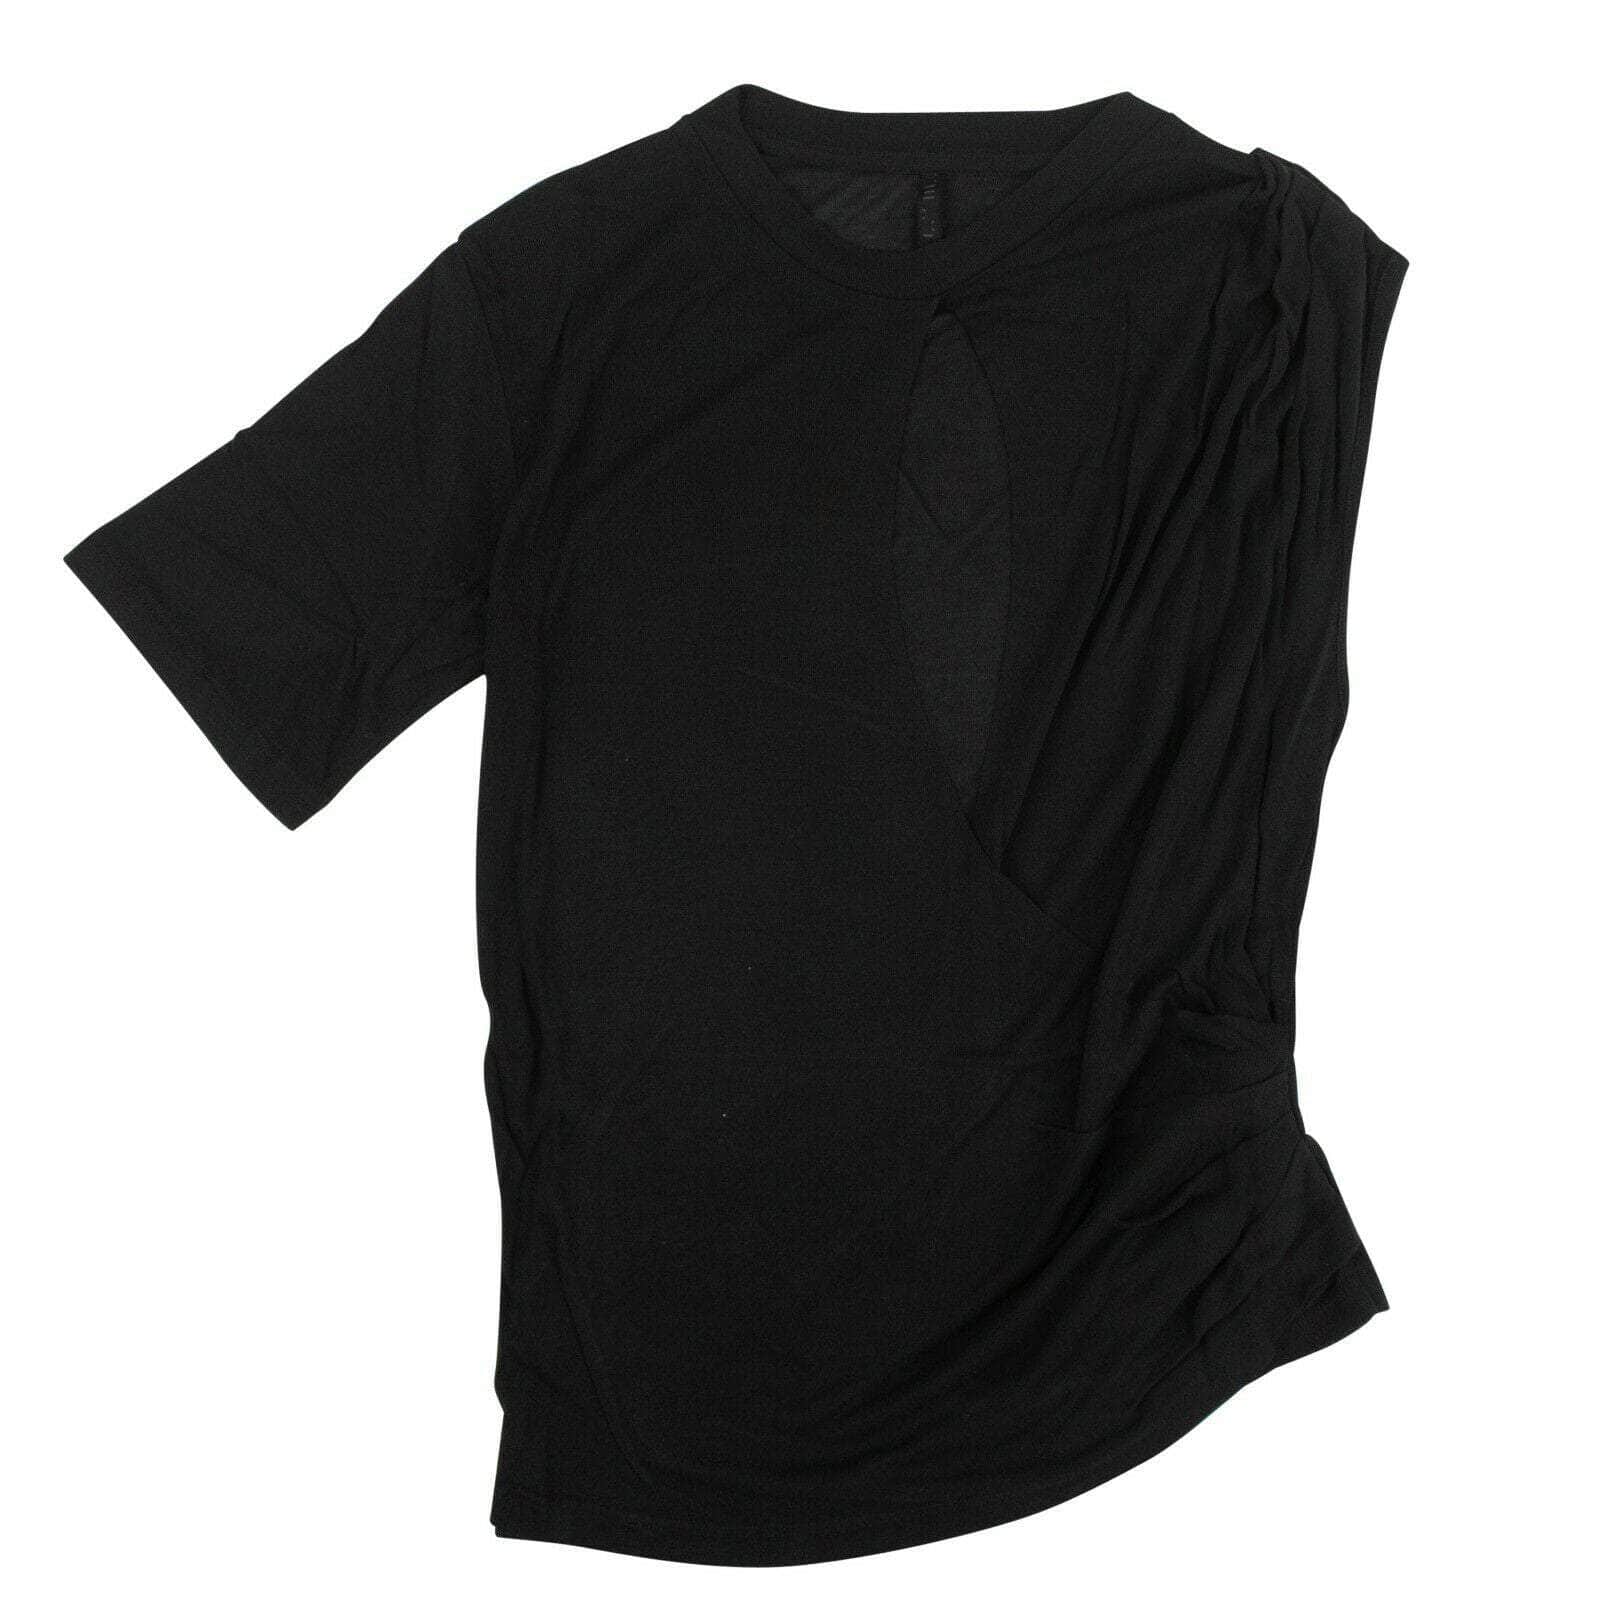 UNRAVEL PROJECT channelenable-all, couponcollection, gender-womens, main-clothing, sale-enable, size-m, size-s, size-xs, under-250, unravel-project Black Silk Draped T-Shirt